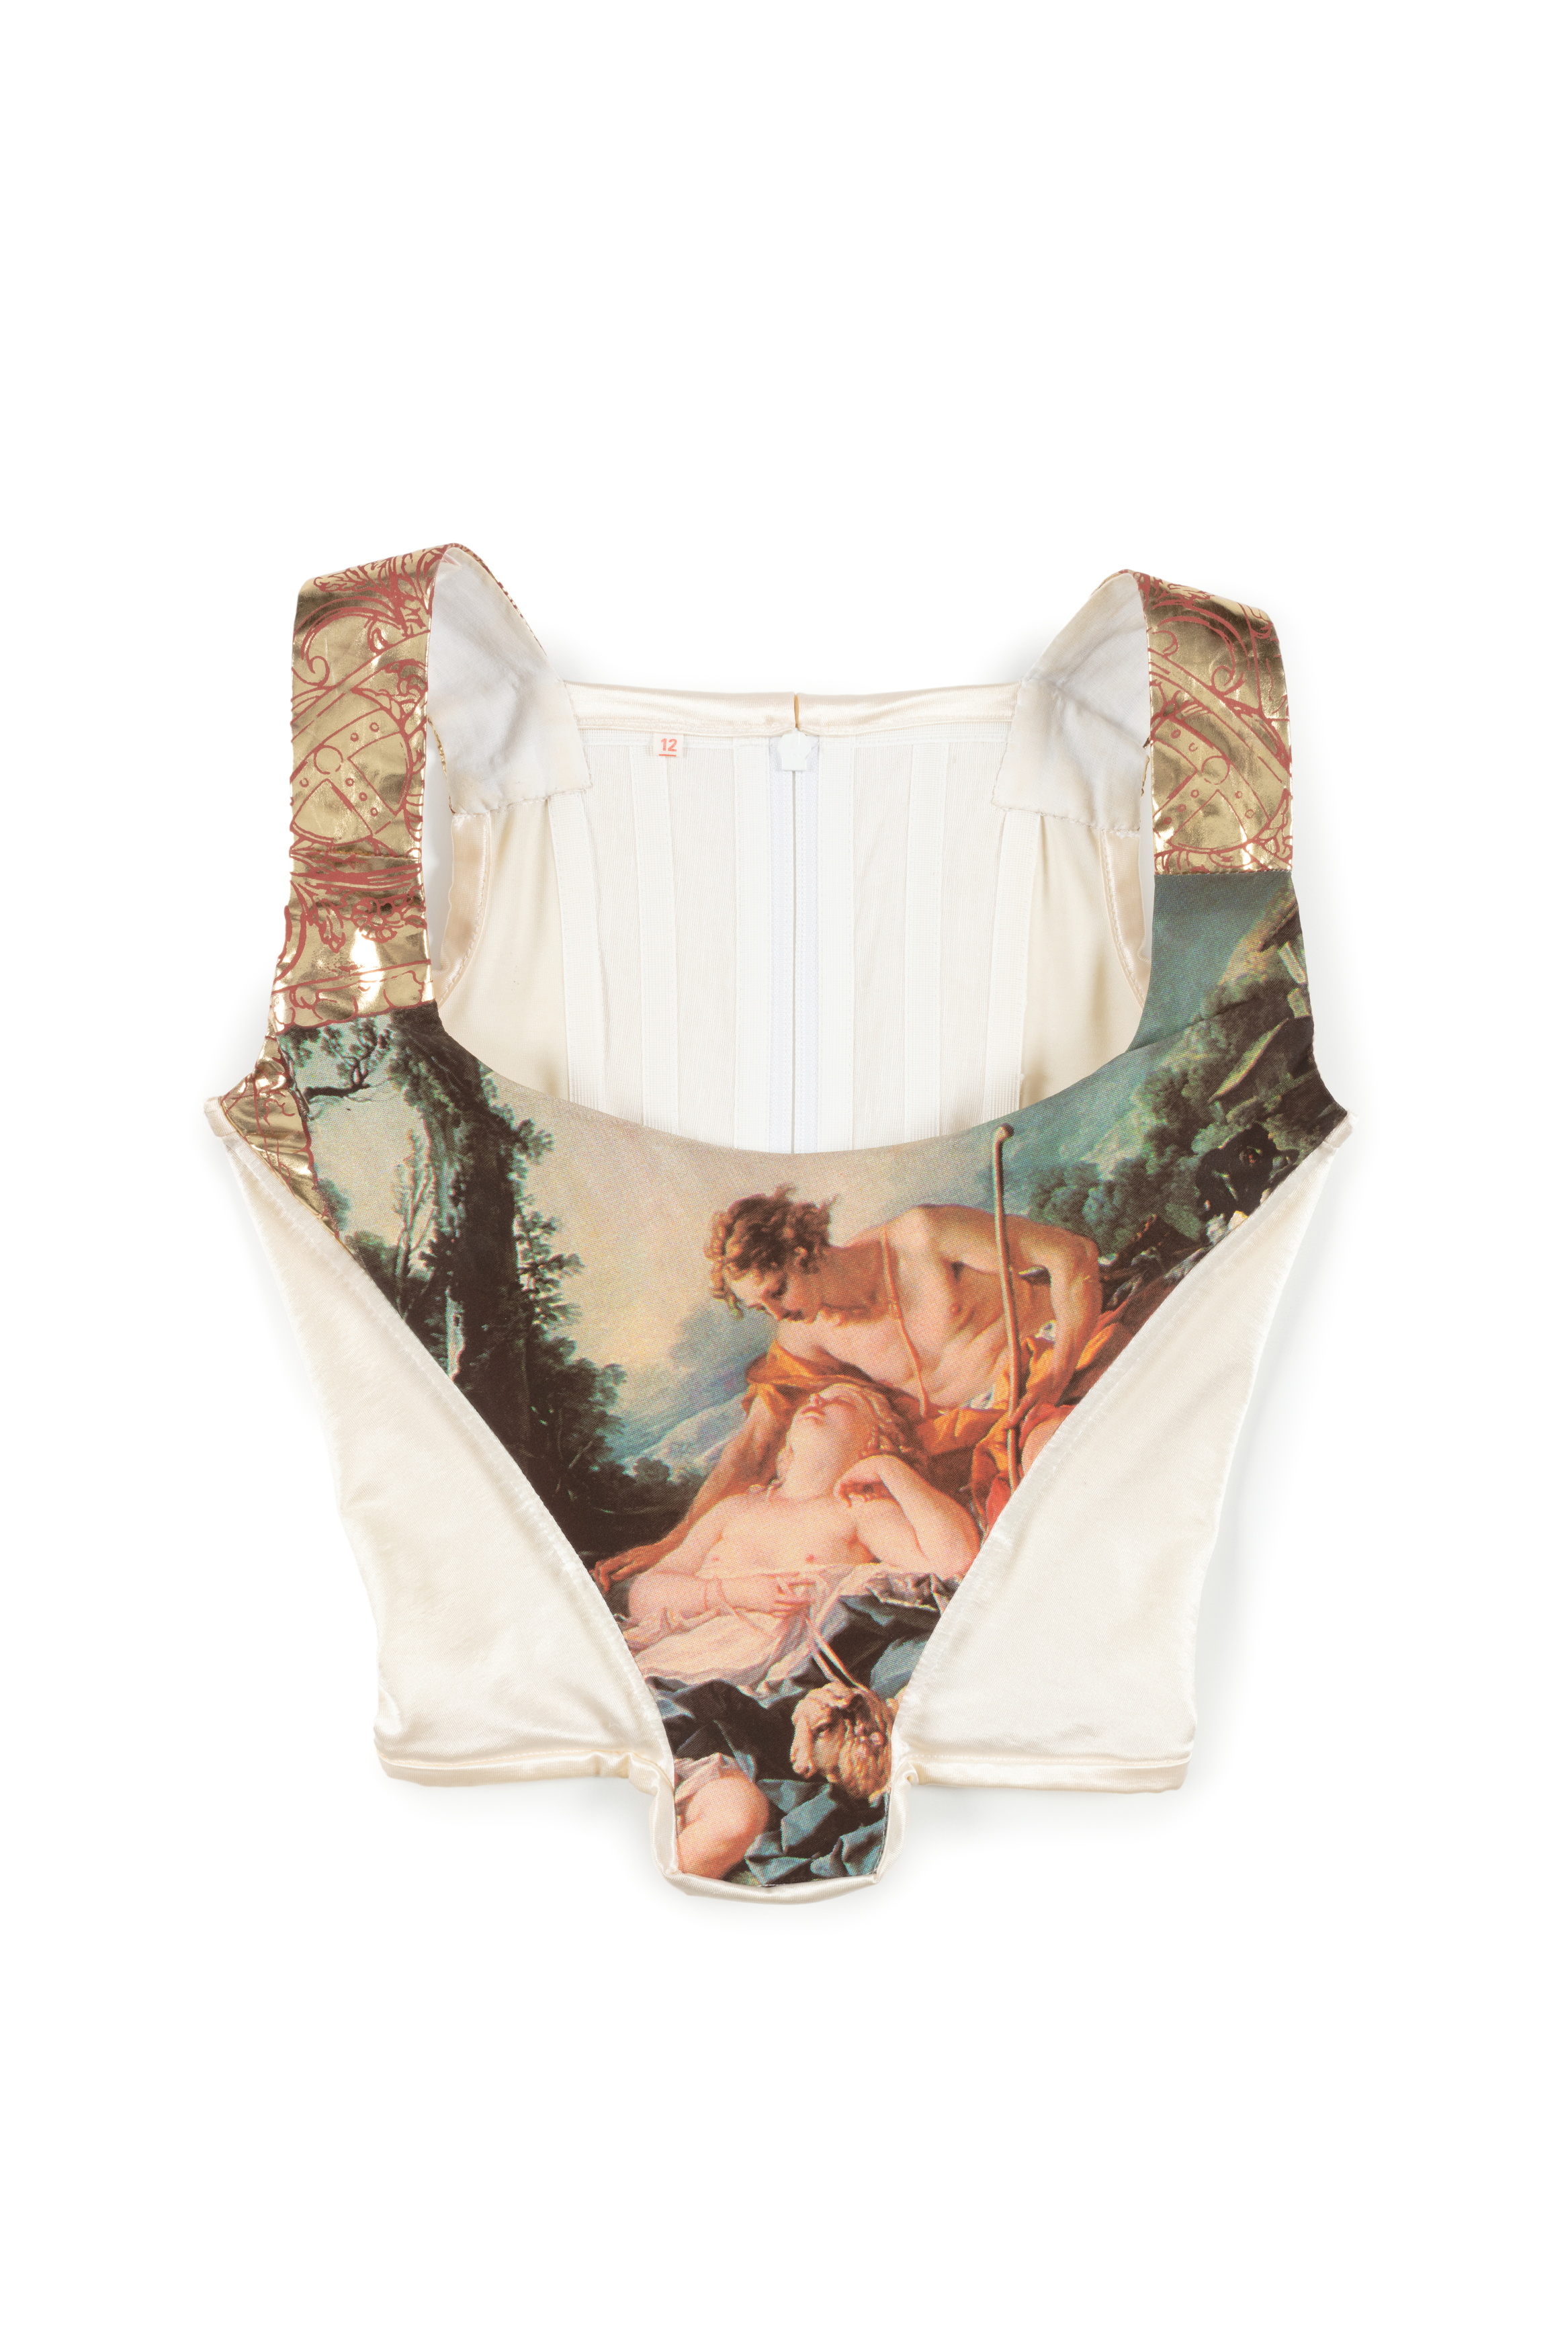 Womens corset by Vivienne Westwood